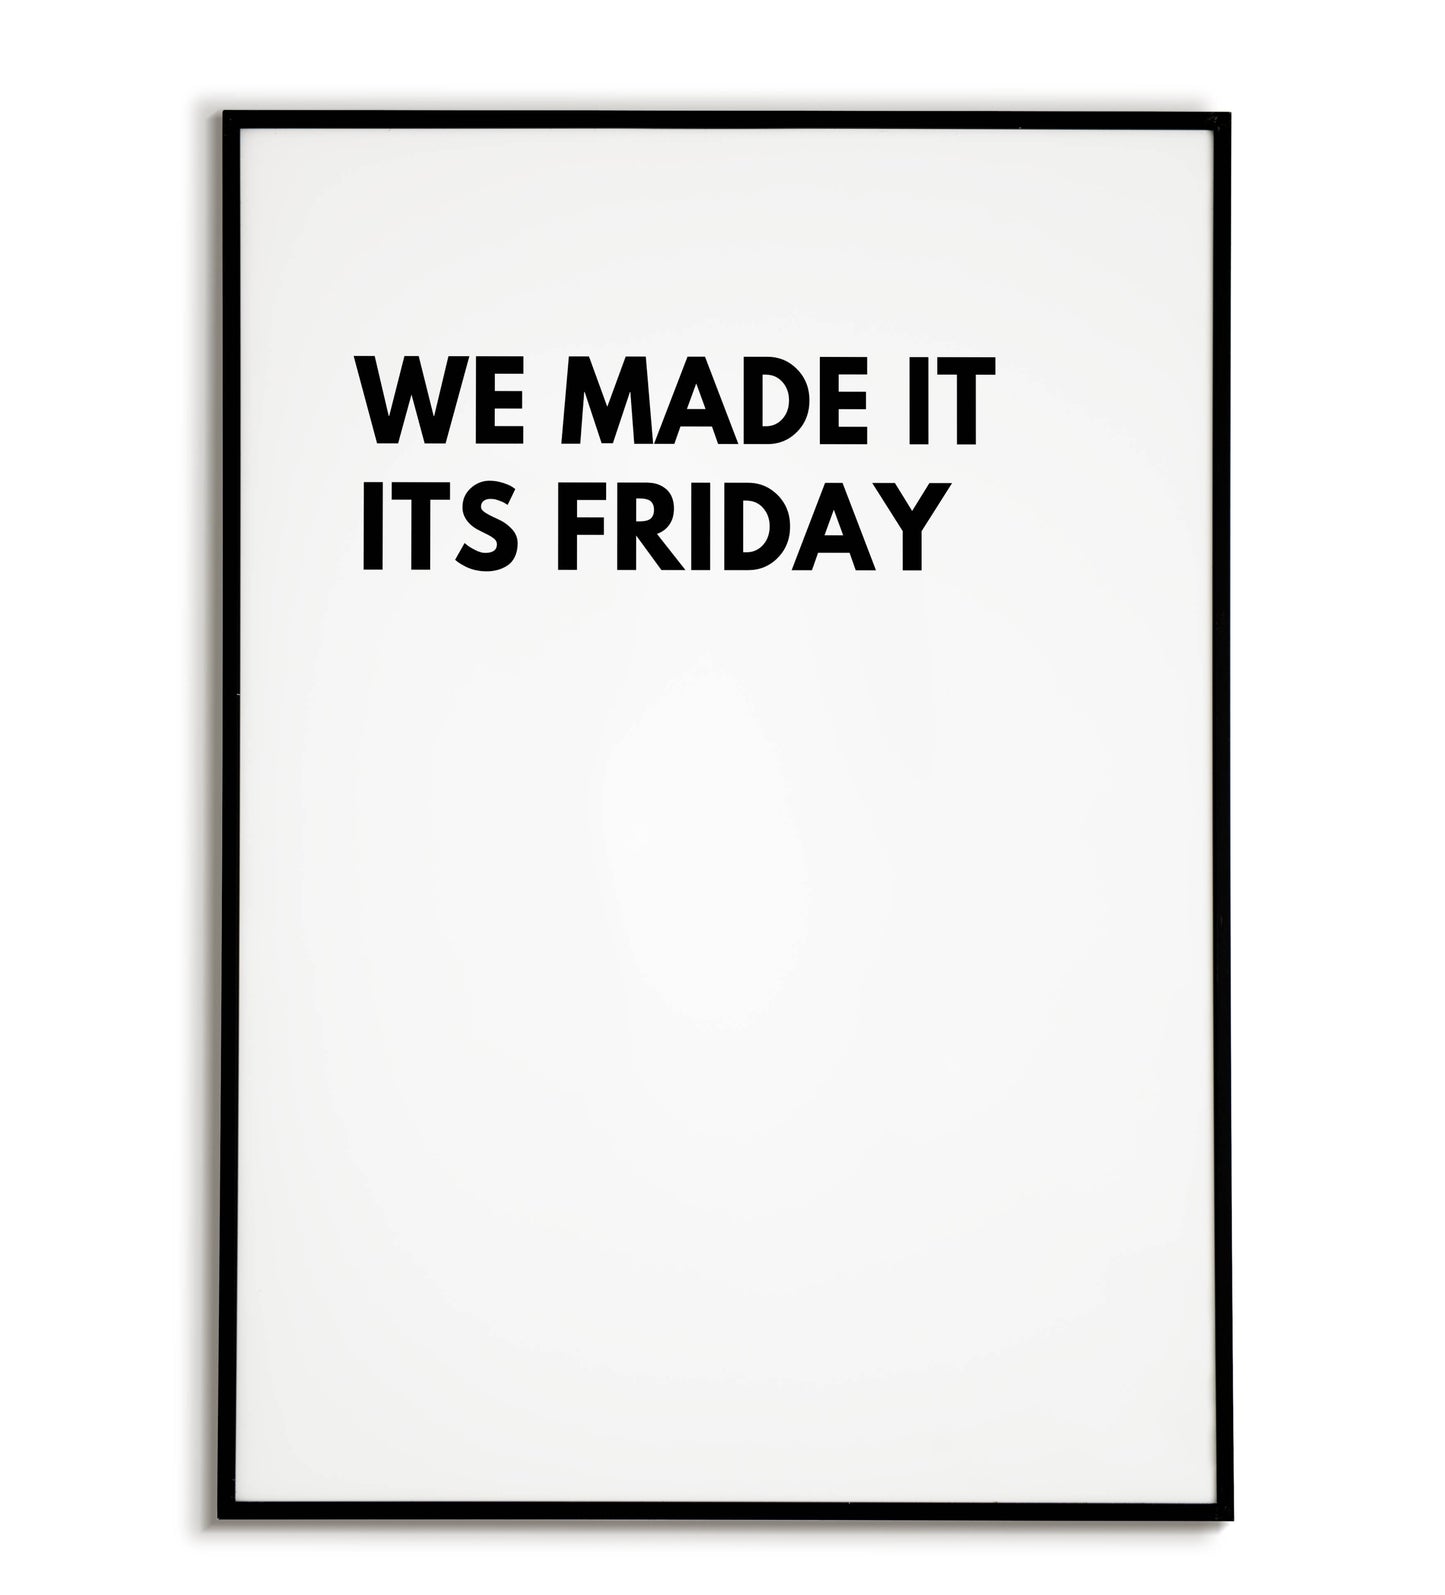 Humorous "We made it it's friday" printable poster, celebrating the end of the workweek.	